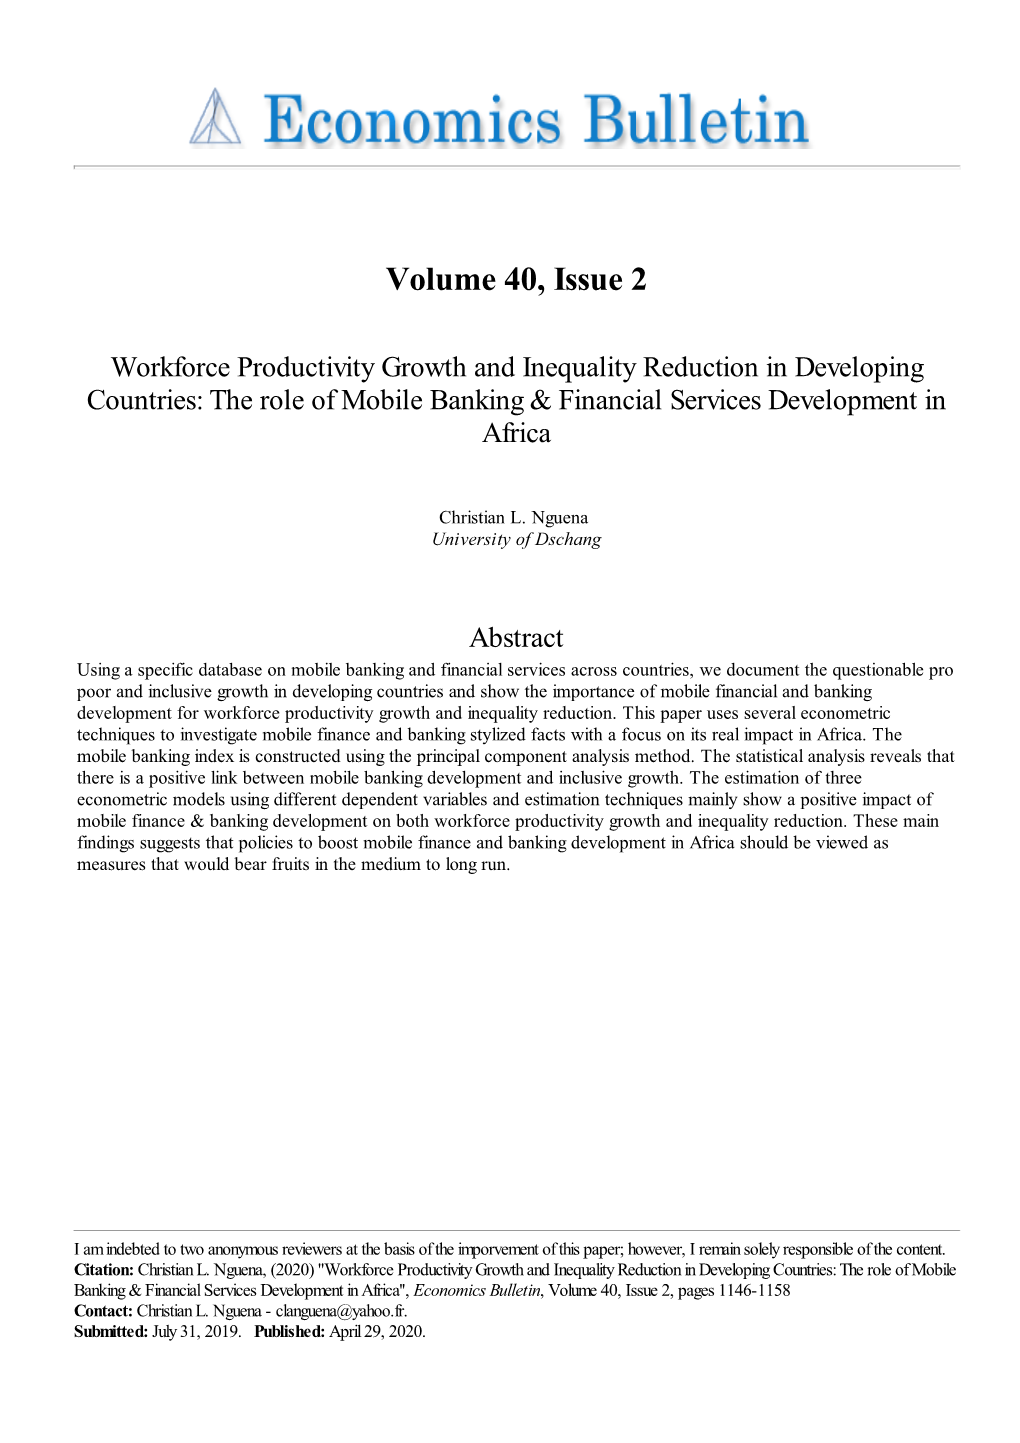 Workforce Productivity Growth and Inequality Reduction in Developing Countries: the Role of Mobile Banking & Financial Services Development in Africa